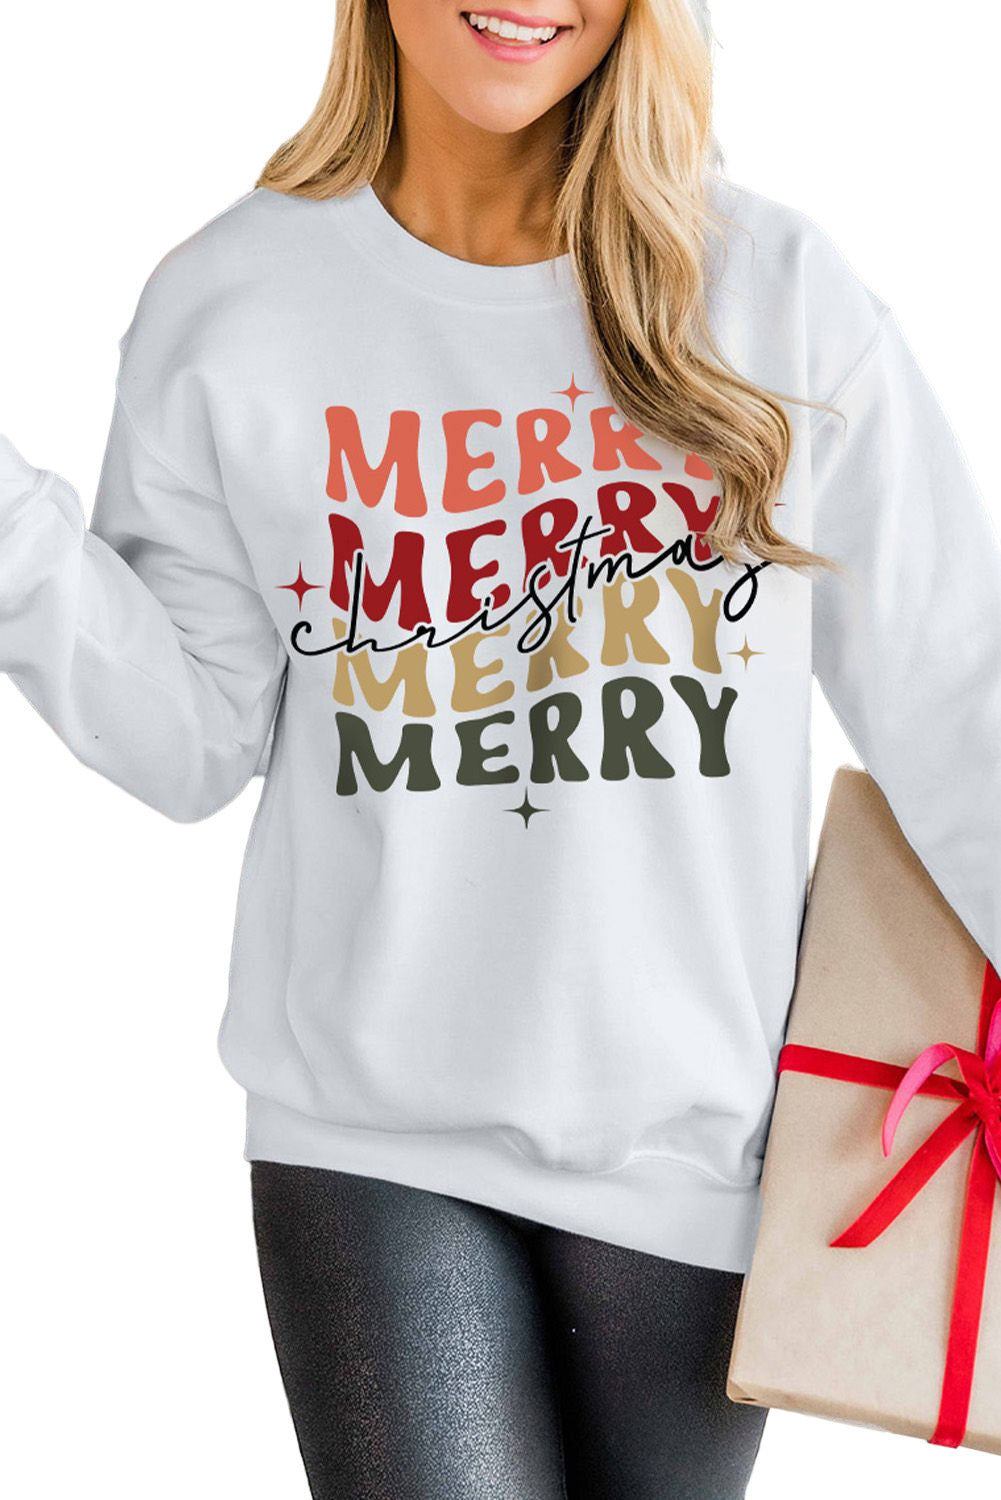 MERRY and BRIGHT Leopard Print Pullover Sweatshirt